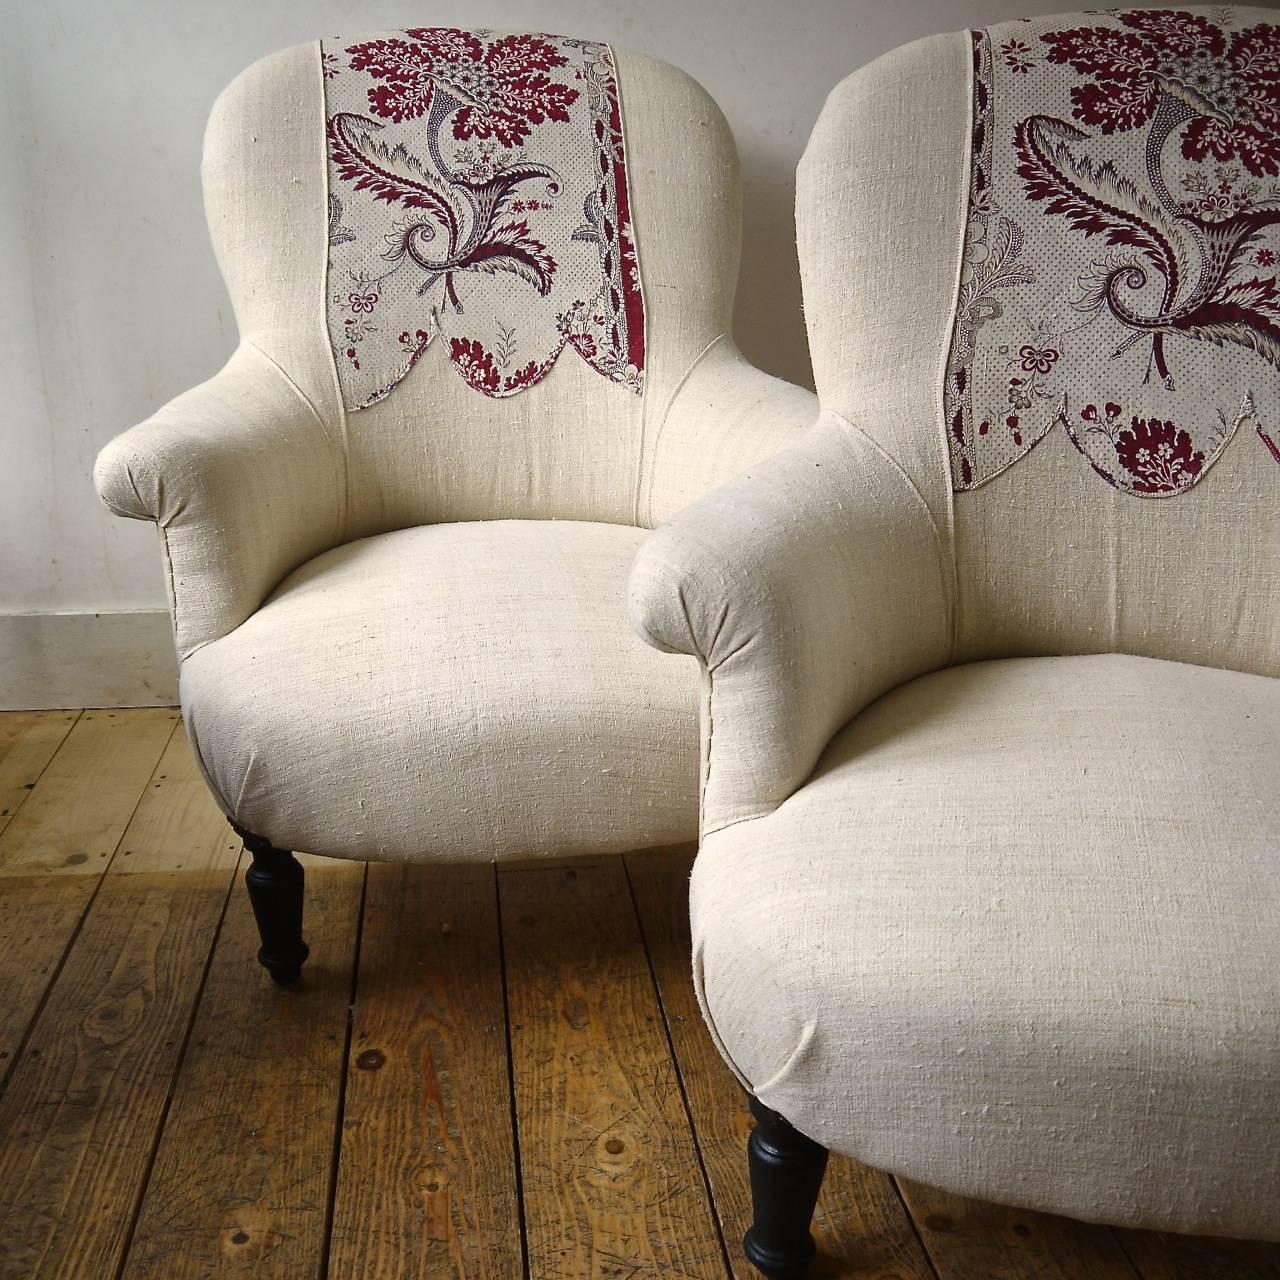 Pair of French 19th century armchairs newly upholstered in a 19th century French pale honey colored heavy linen with an 18th century French printed detail inserted on the backs. This circa 1780s block printed design has a pretty scalloped edge with